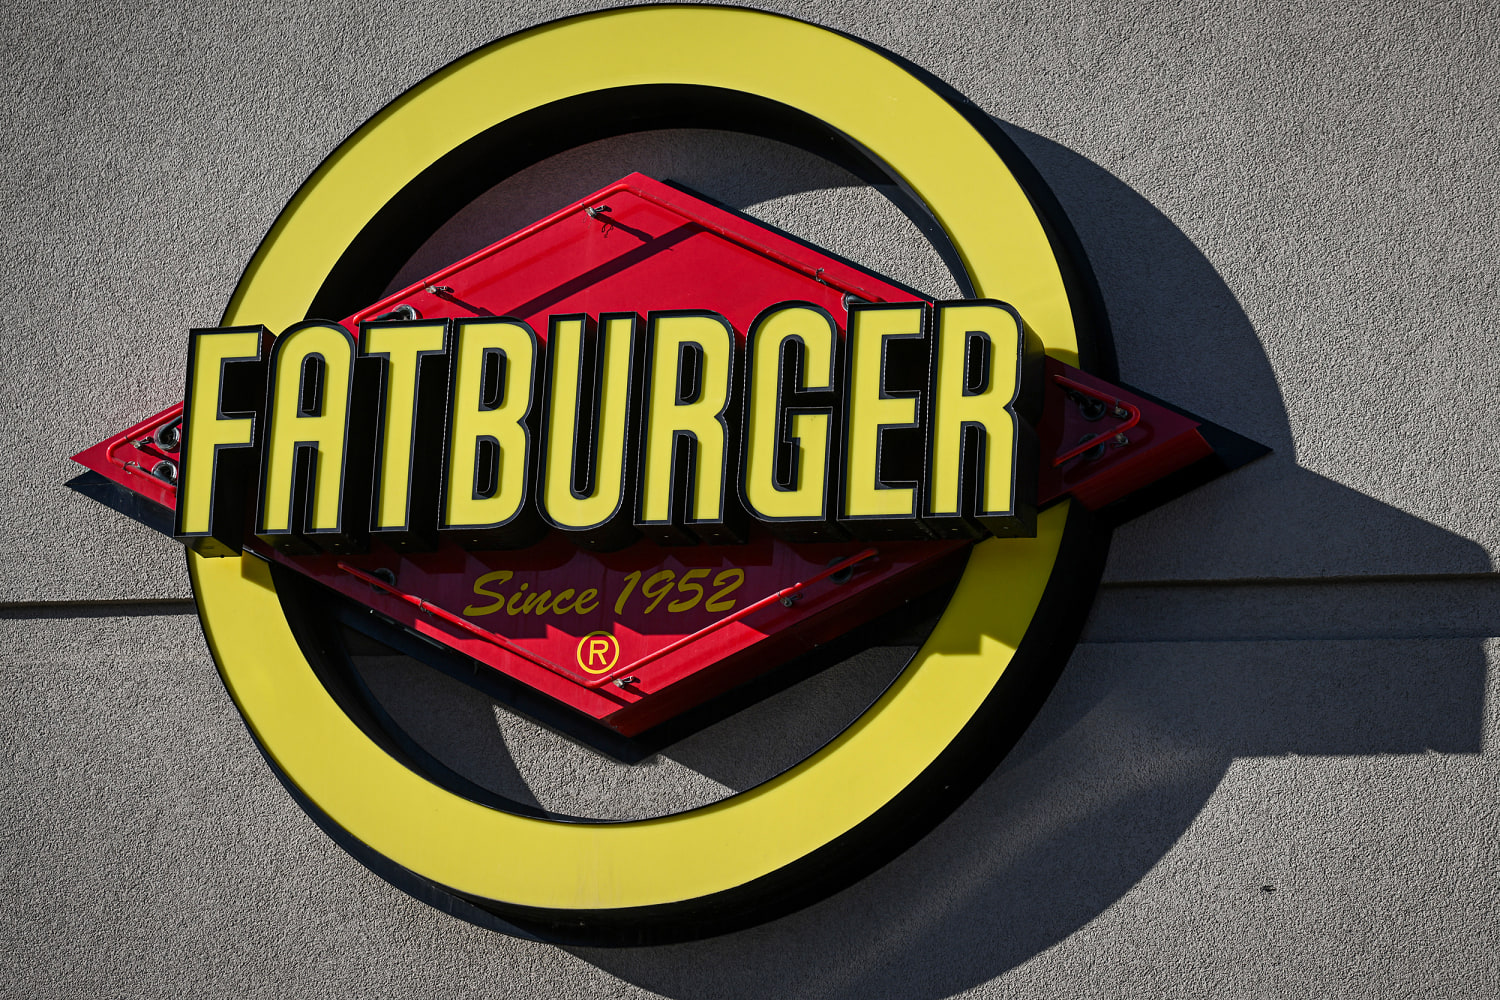 Fatburger parent company, chairman charged in alleged fraud scheme